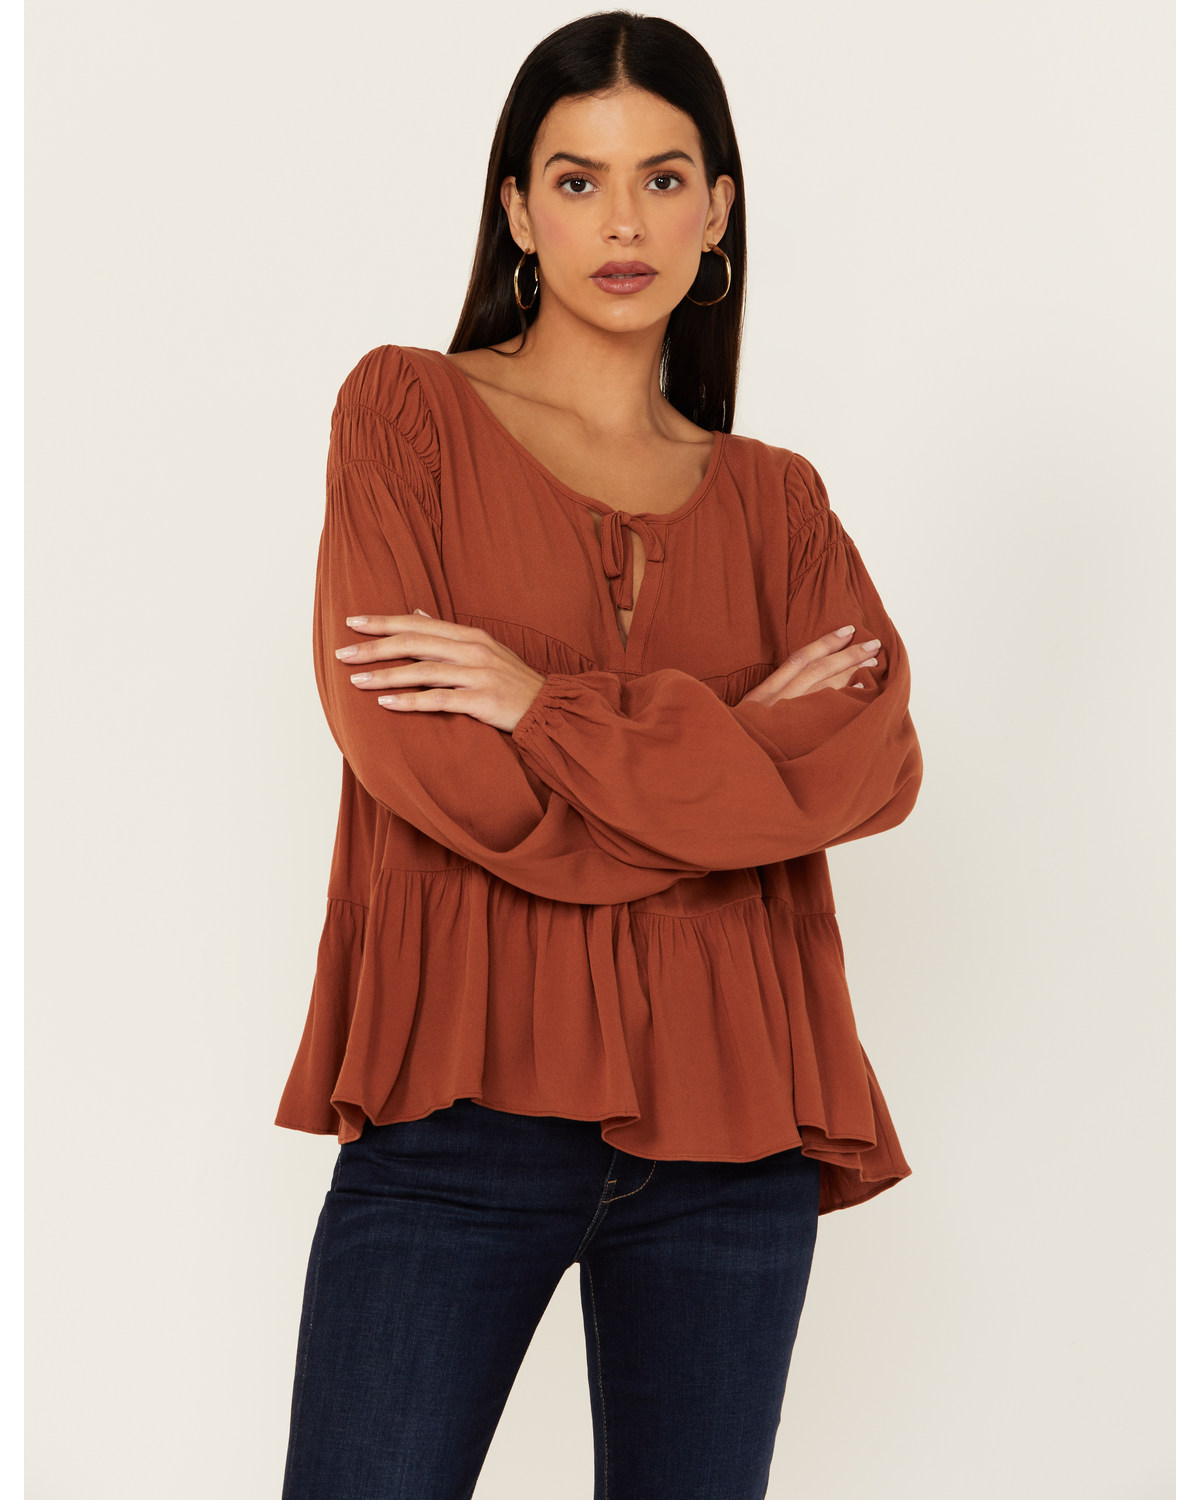 Cleo + Wolf Women's Tiered Flowy Tie Front Blouse